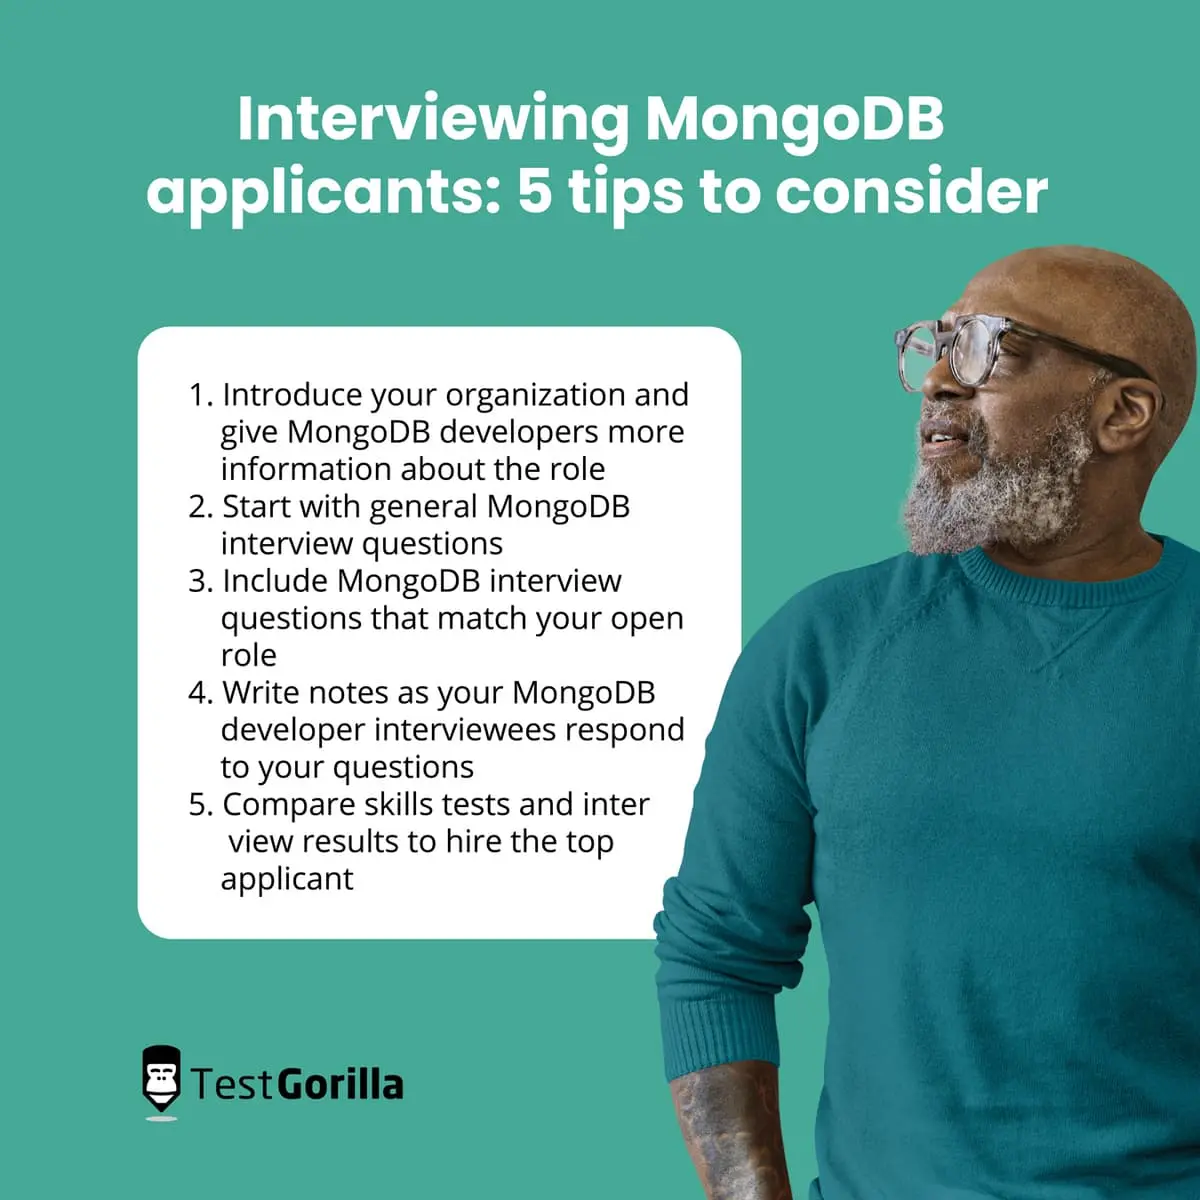 image listing 5 tips to consider when interviewing MongoDB applicants